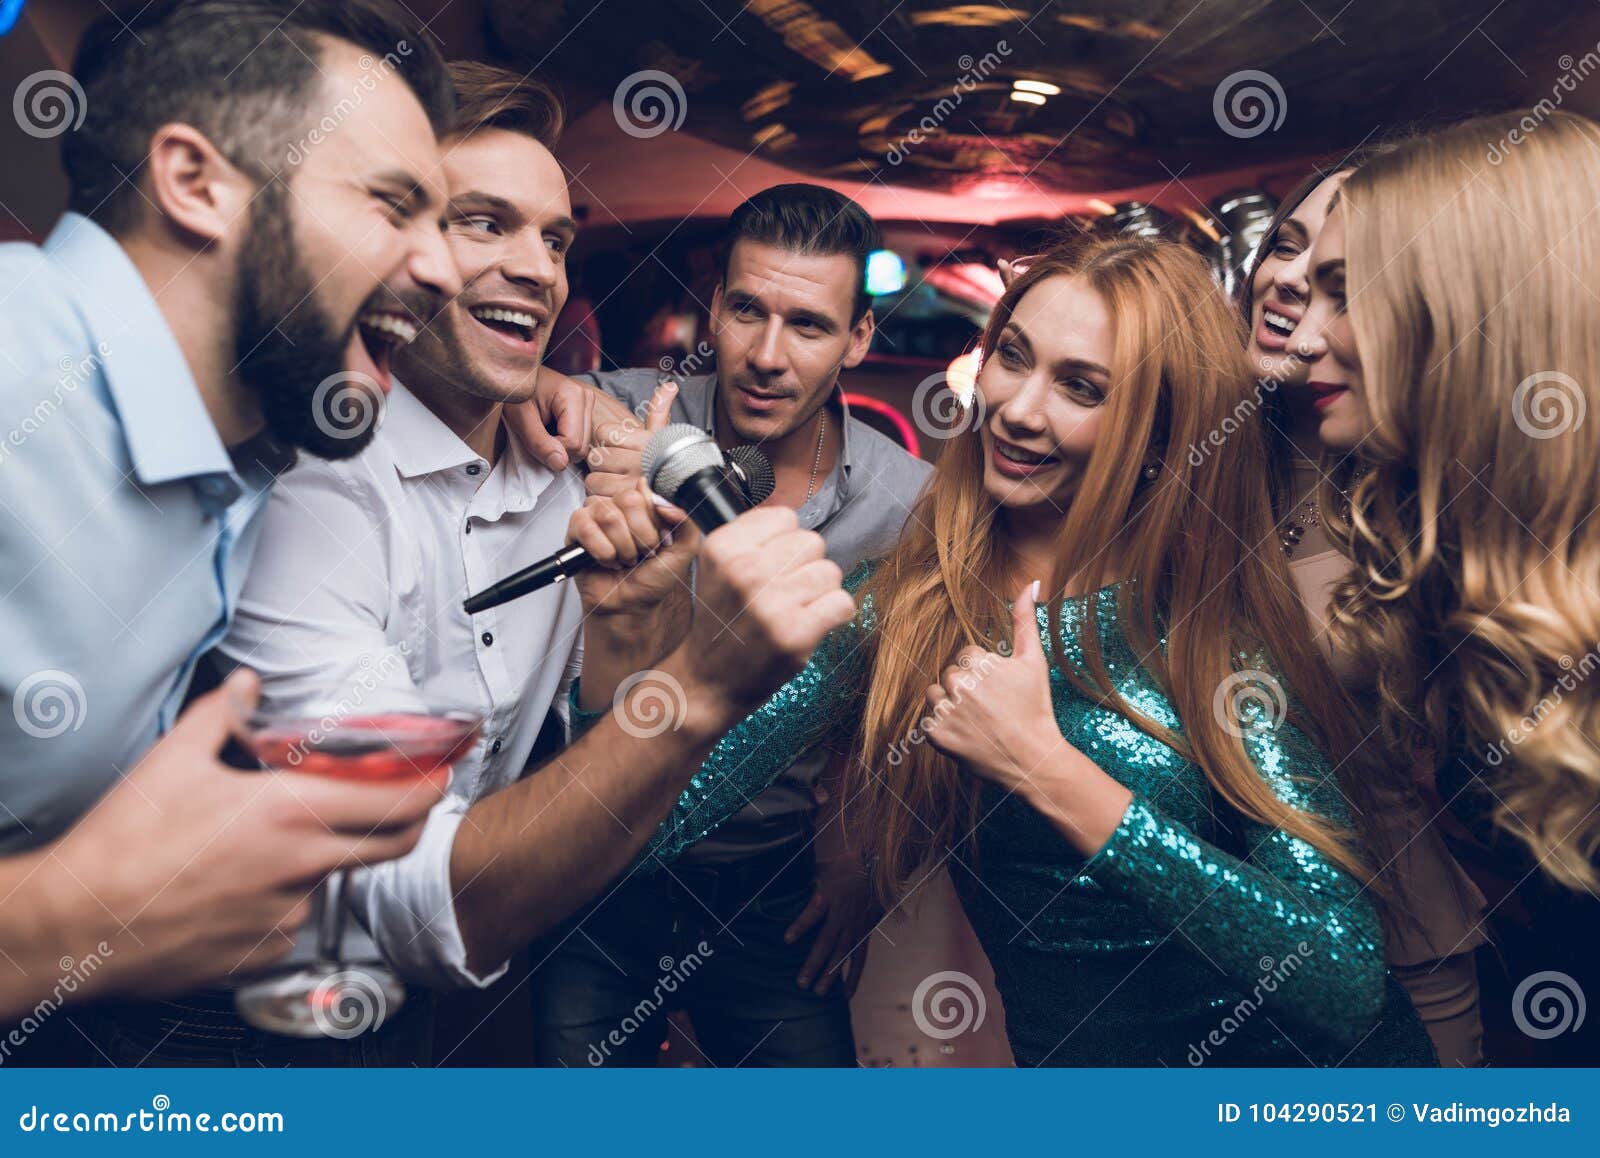 Young People Have Fun in a Nightclub. Three Men and Three Women Staged ...